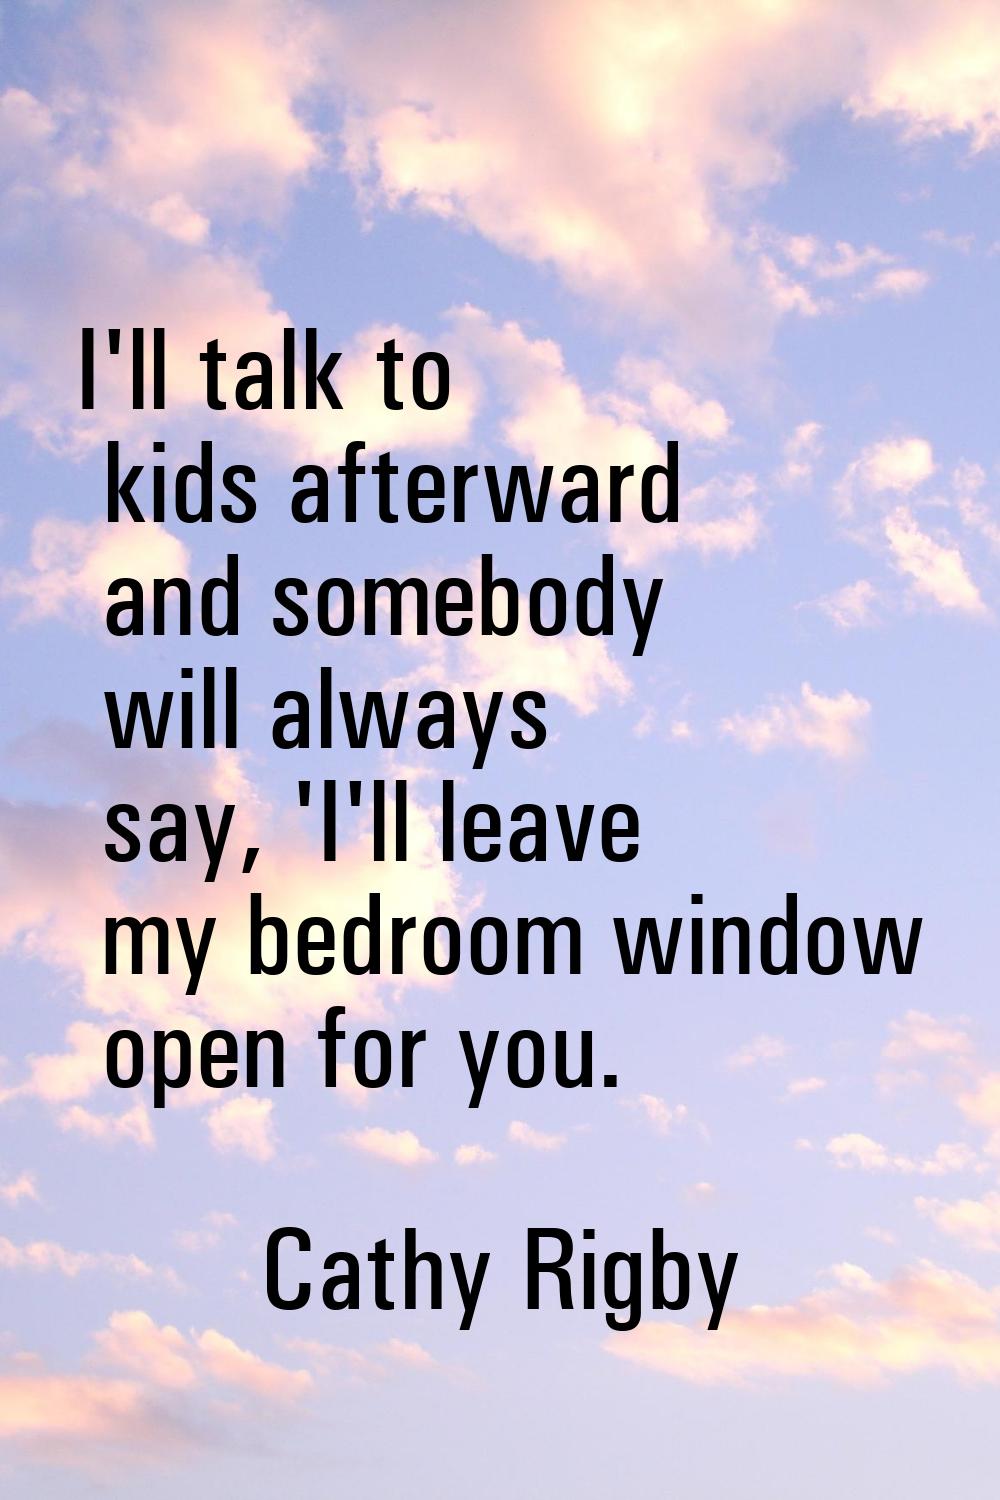 I'll talk to kids afterward and somebody will always say, 'I'll leave my bedroom window open for yo